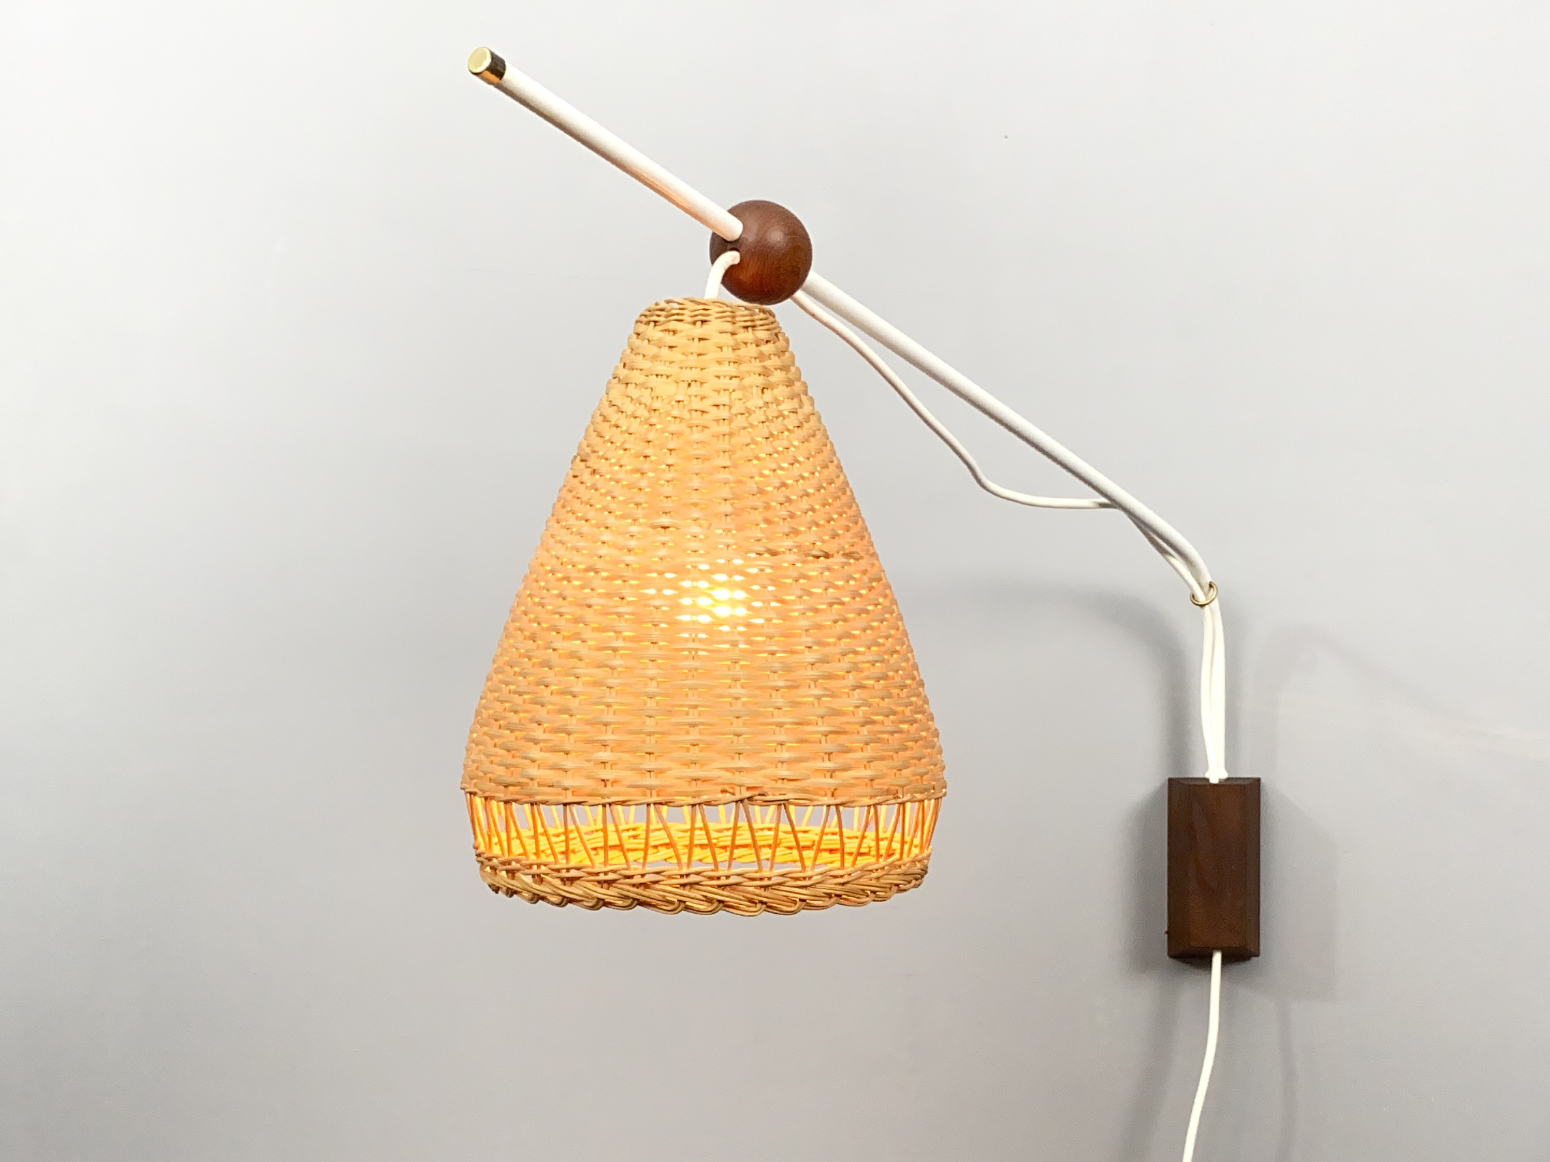 Wall Lamp with Swivel Arm in Teak Wood, Metal and Wicker Lamp Shade, Denmark, 1960s